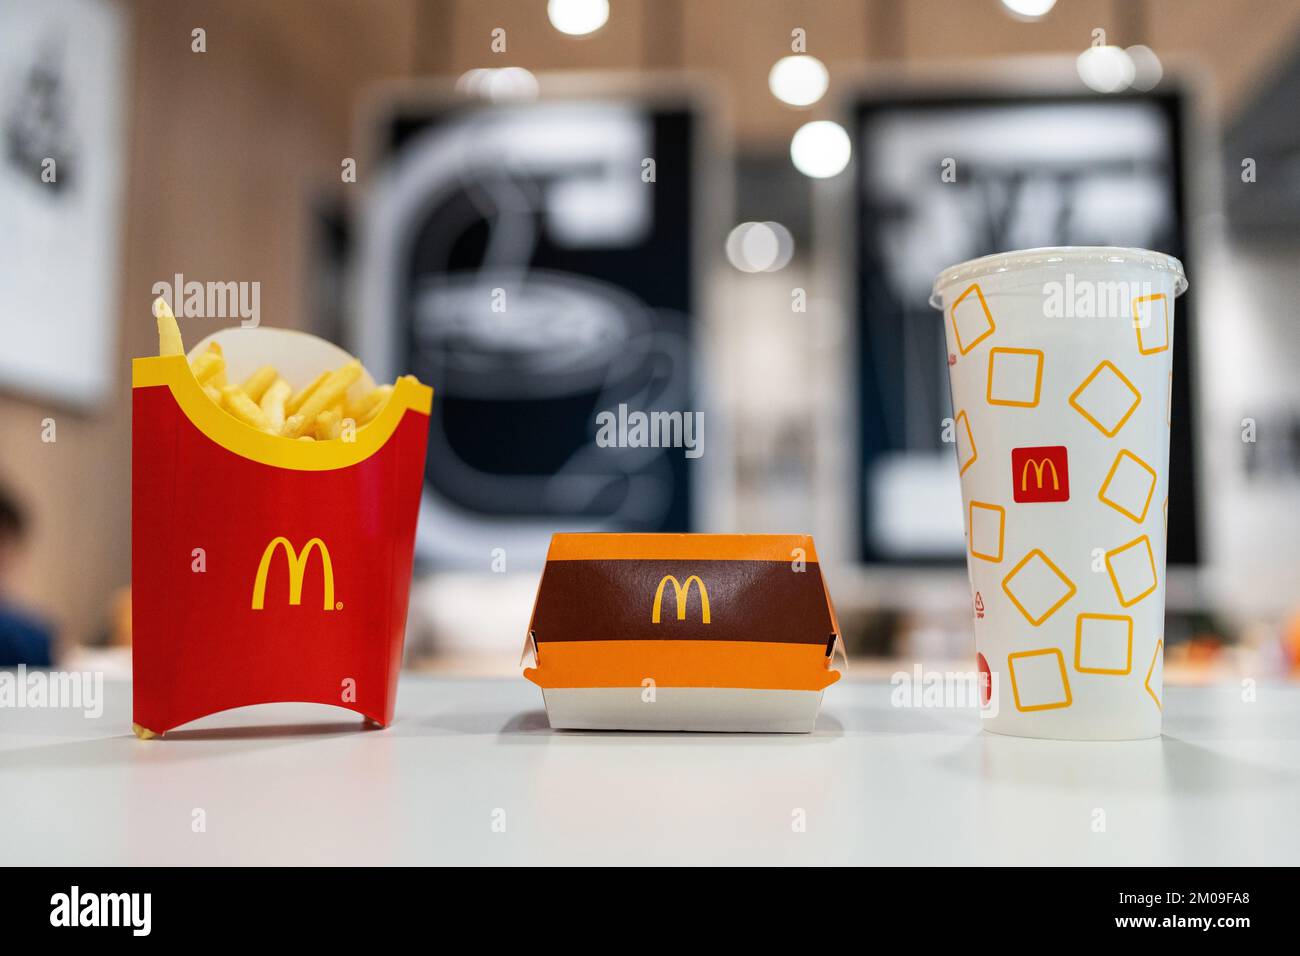 Big Mac Box, French Fries and soft drink on table in McDonald's Restaurant. Stock Photo